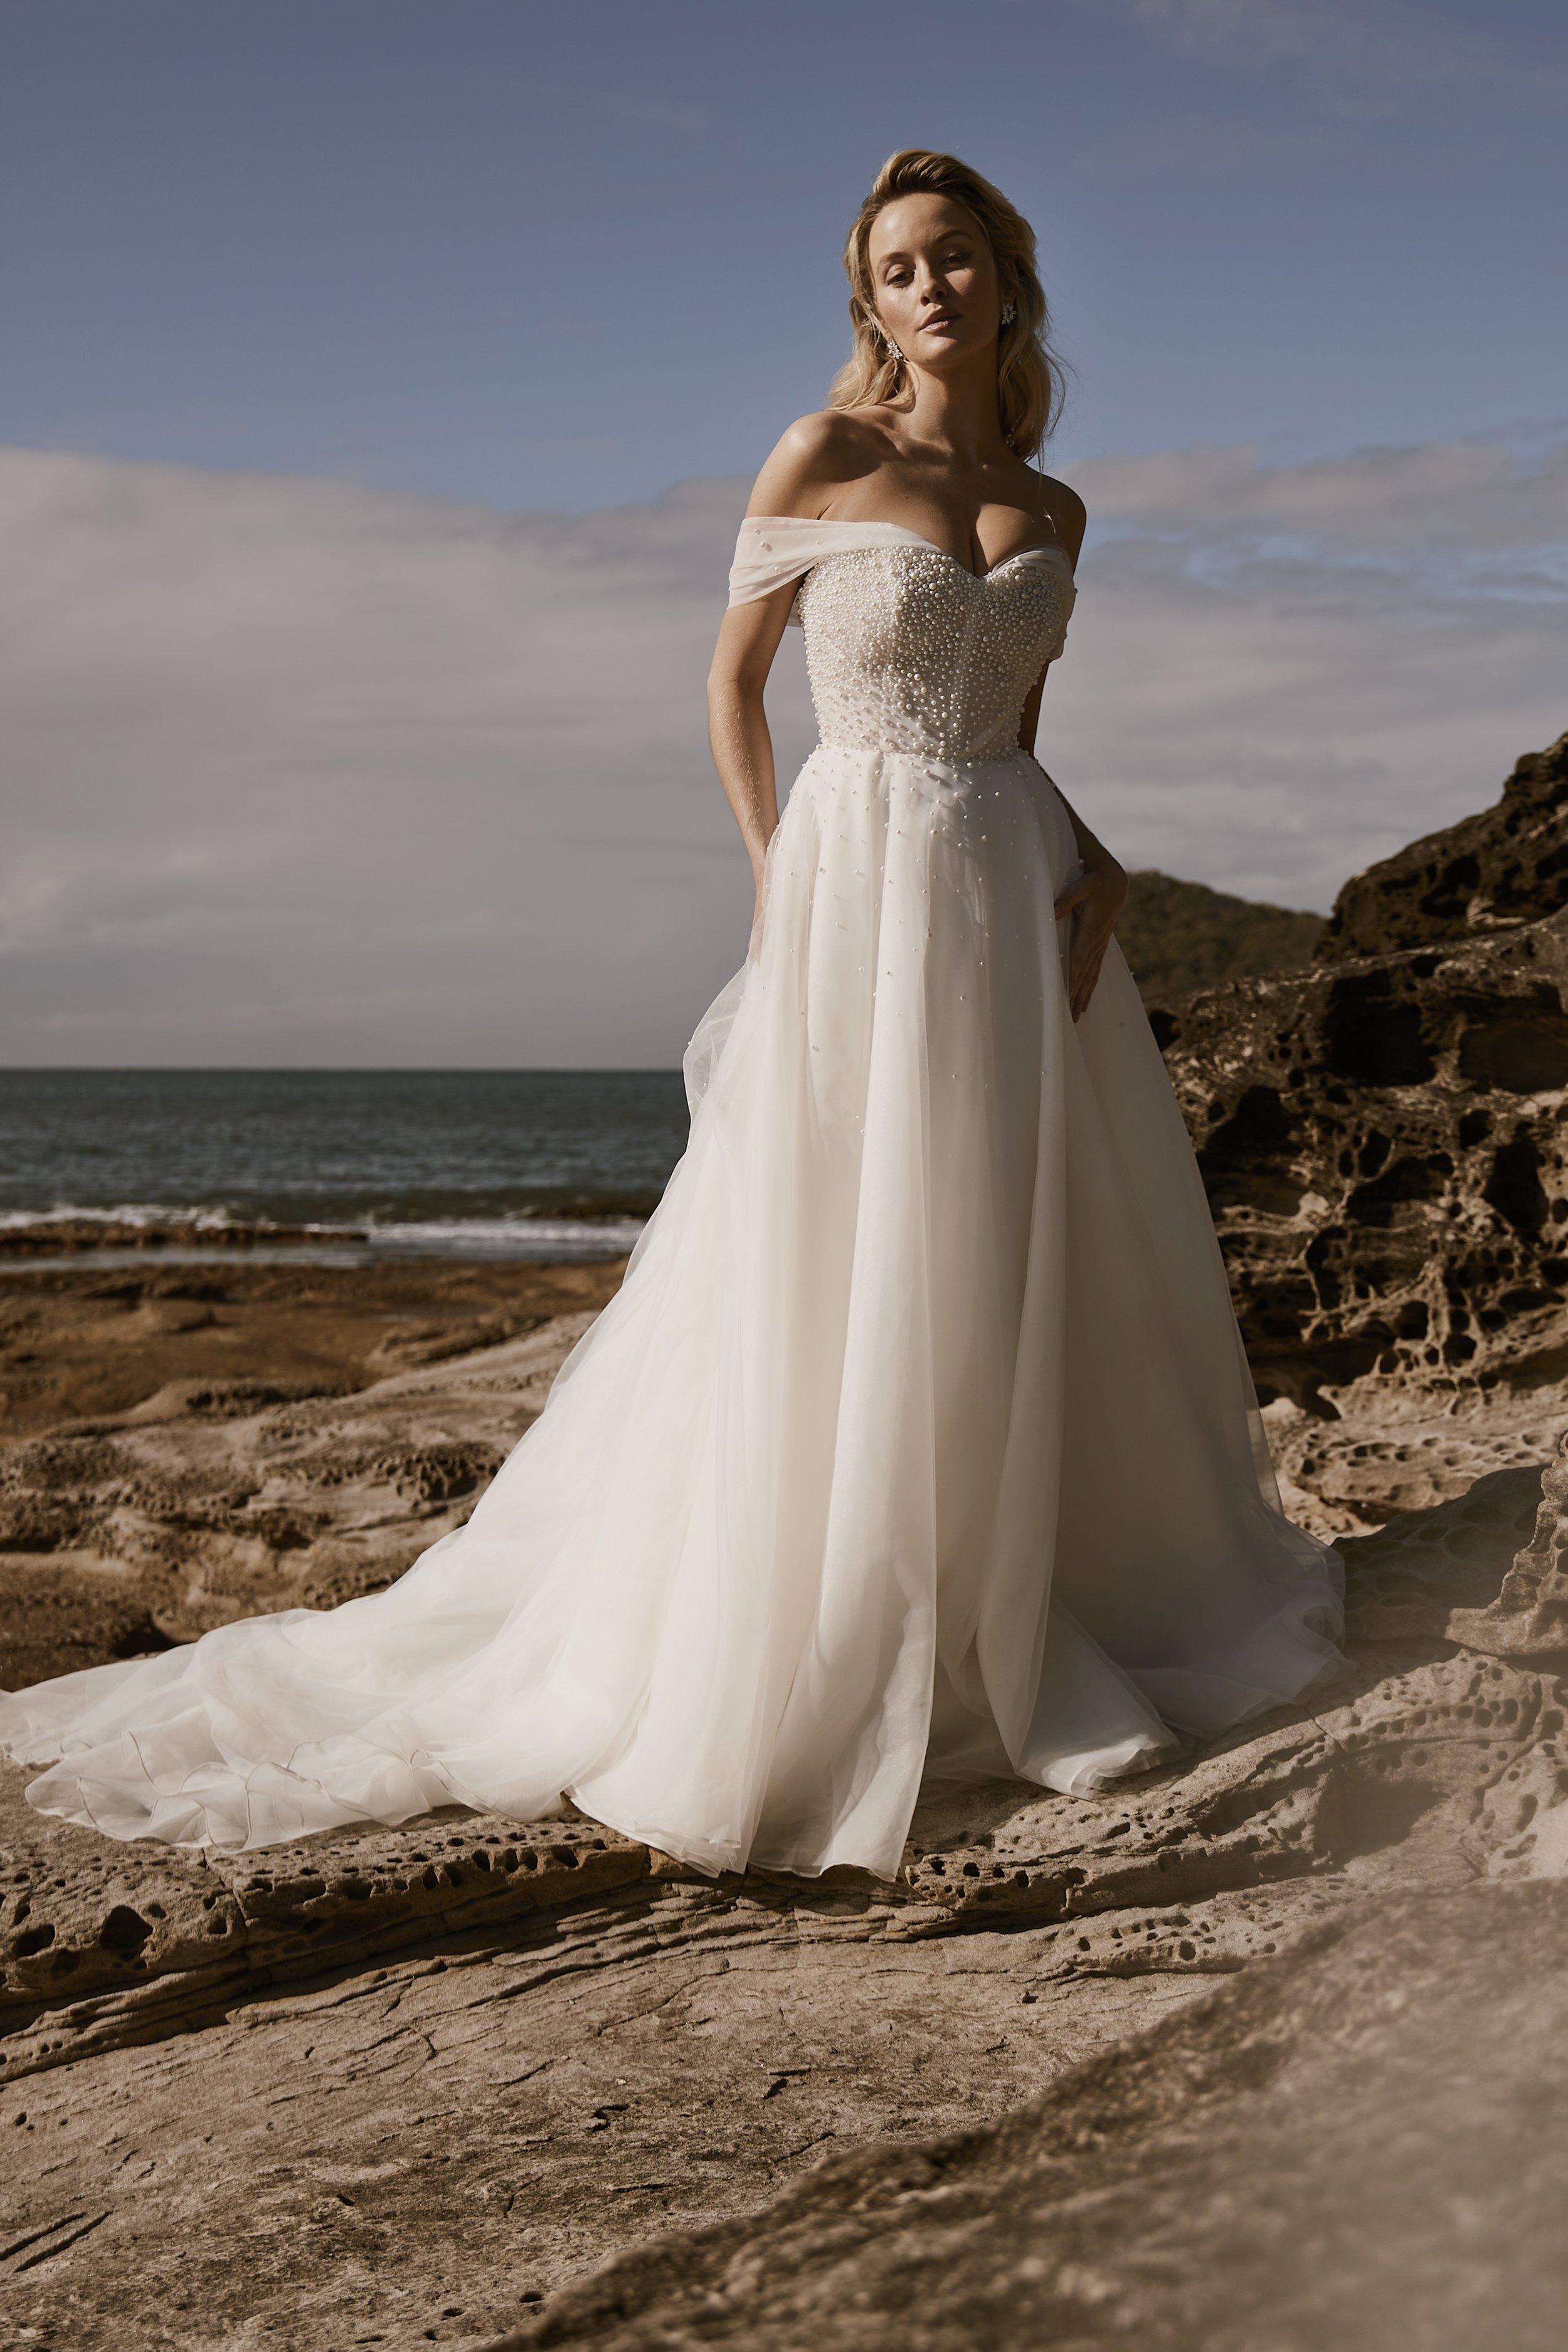 Moira Hughes Bridal Gown  The Tide A line Dress with Detachable Sleeves and Pearls.jpg